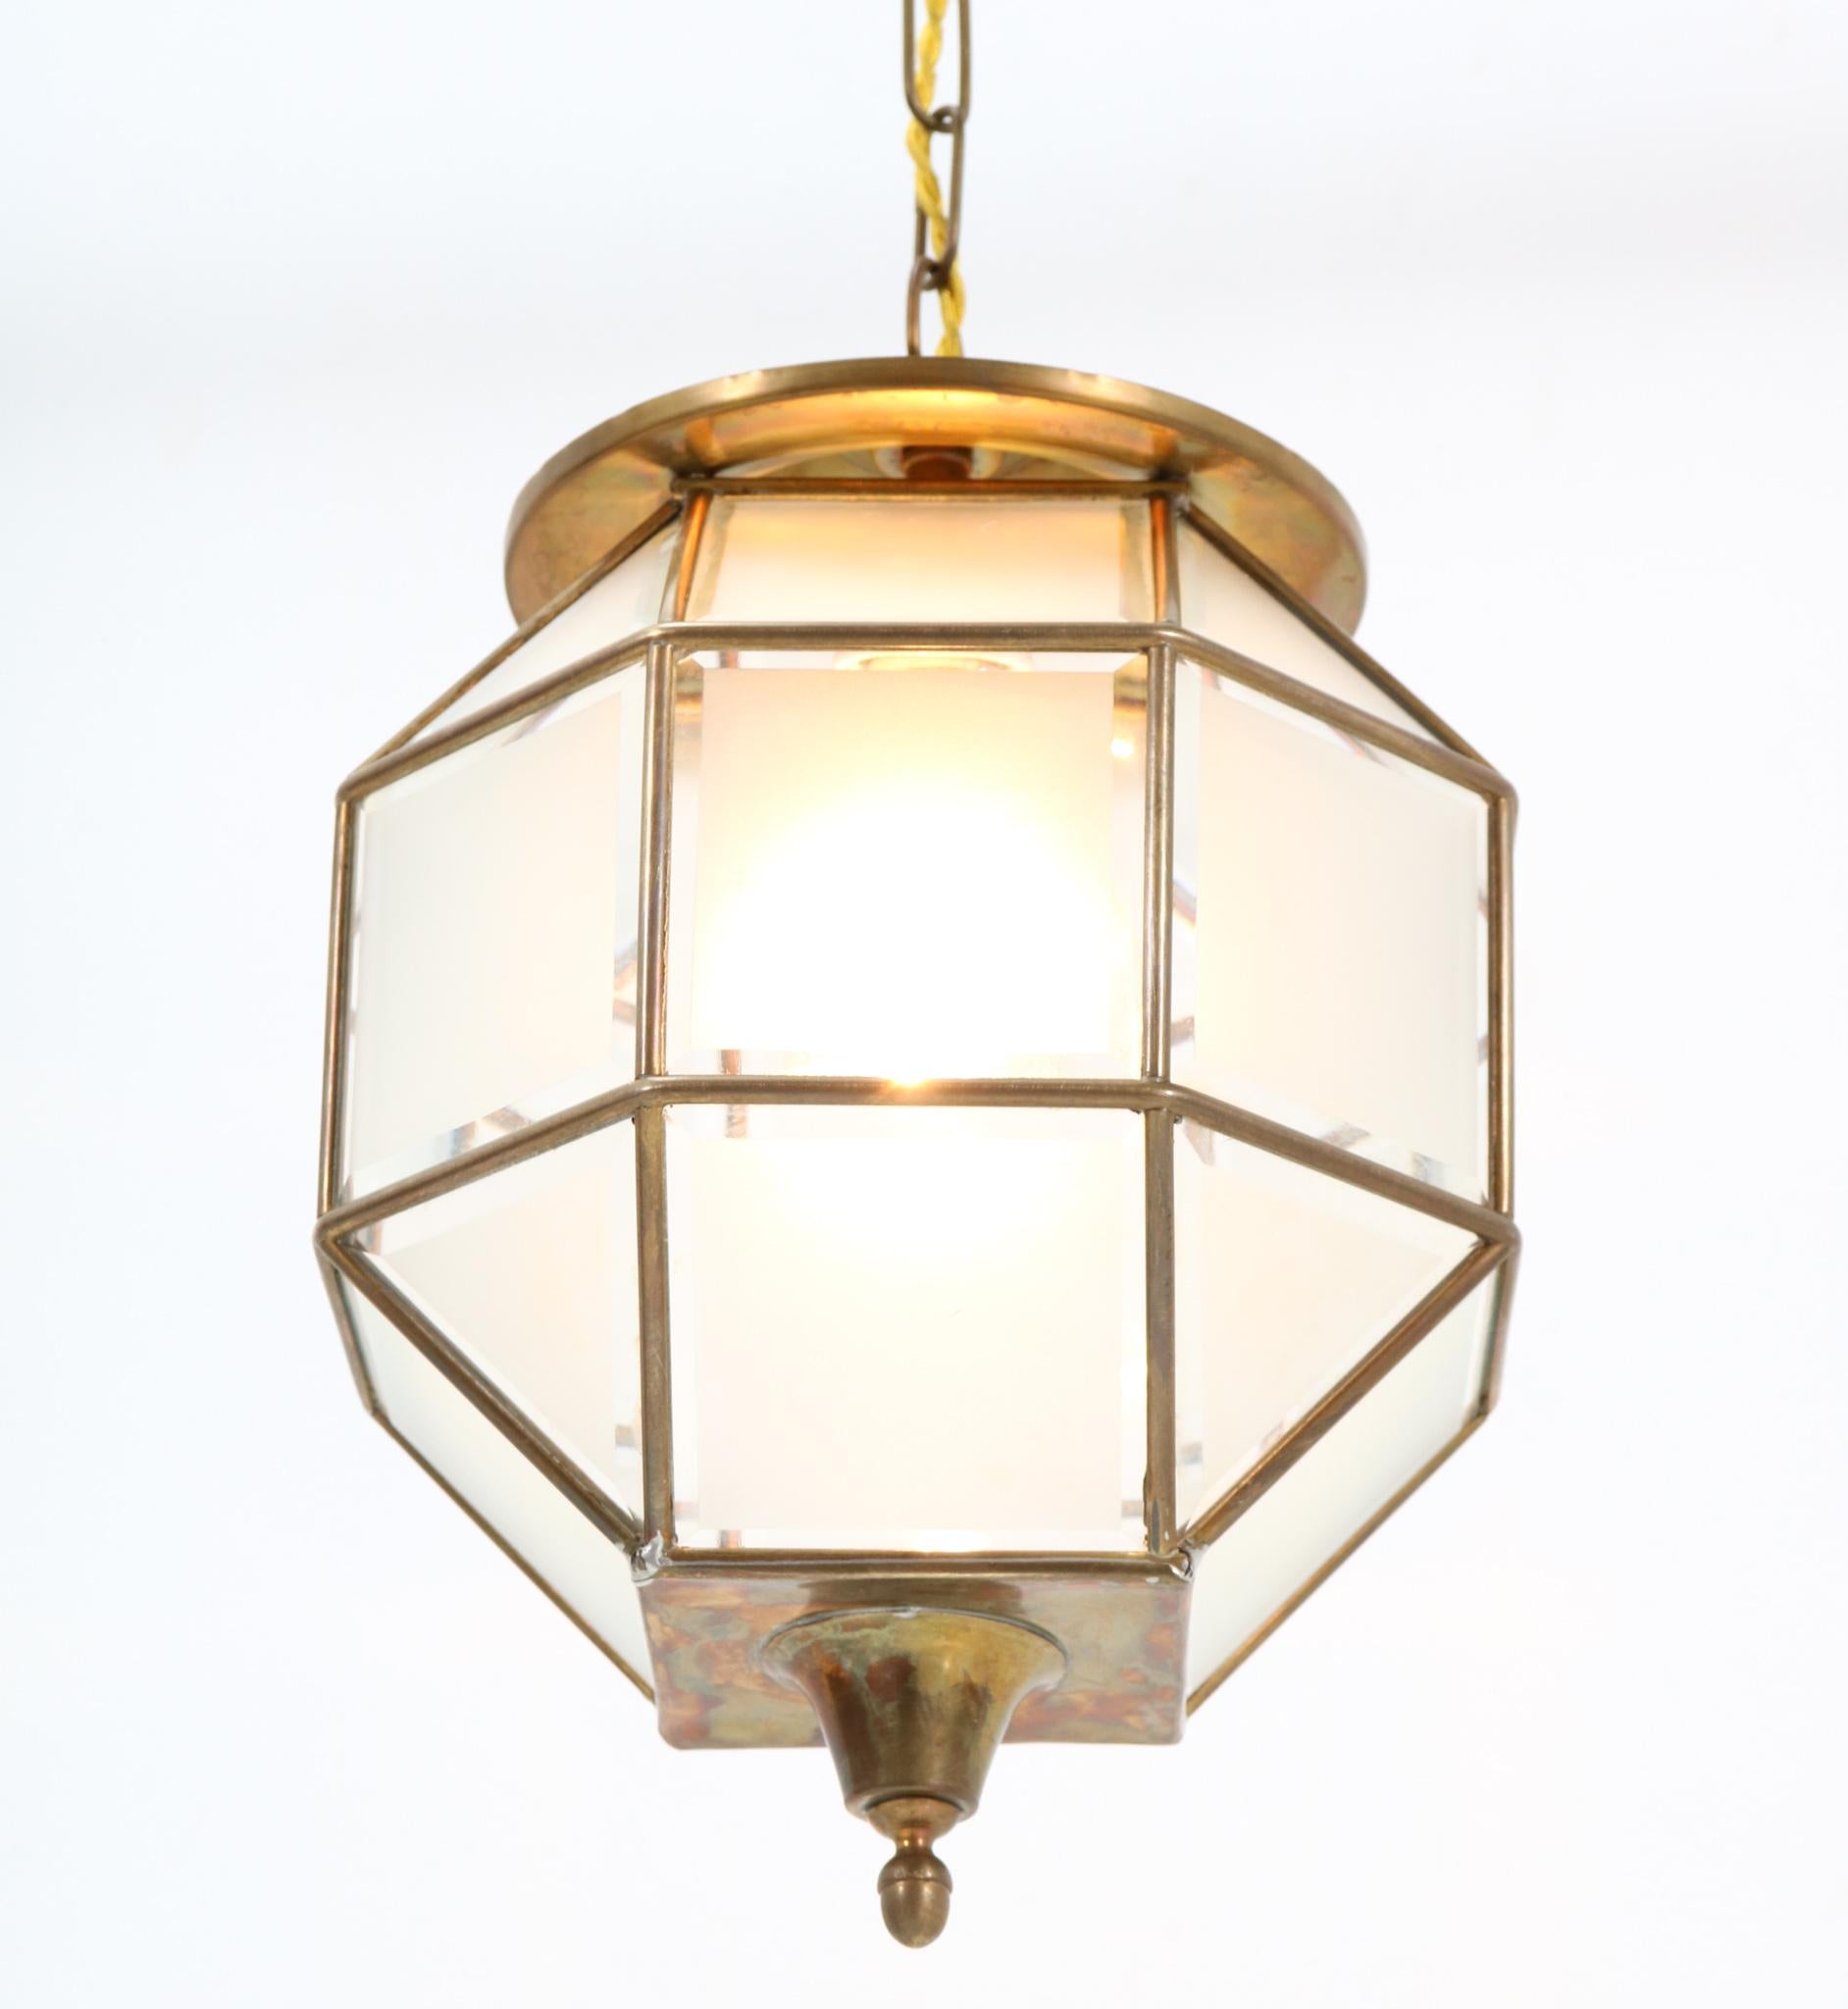 Early 20th Century Brass Art Deco Lantern with Original Cut Glass, 1920s For Sale